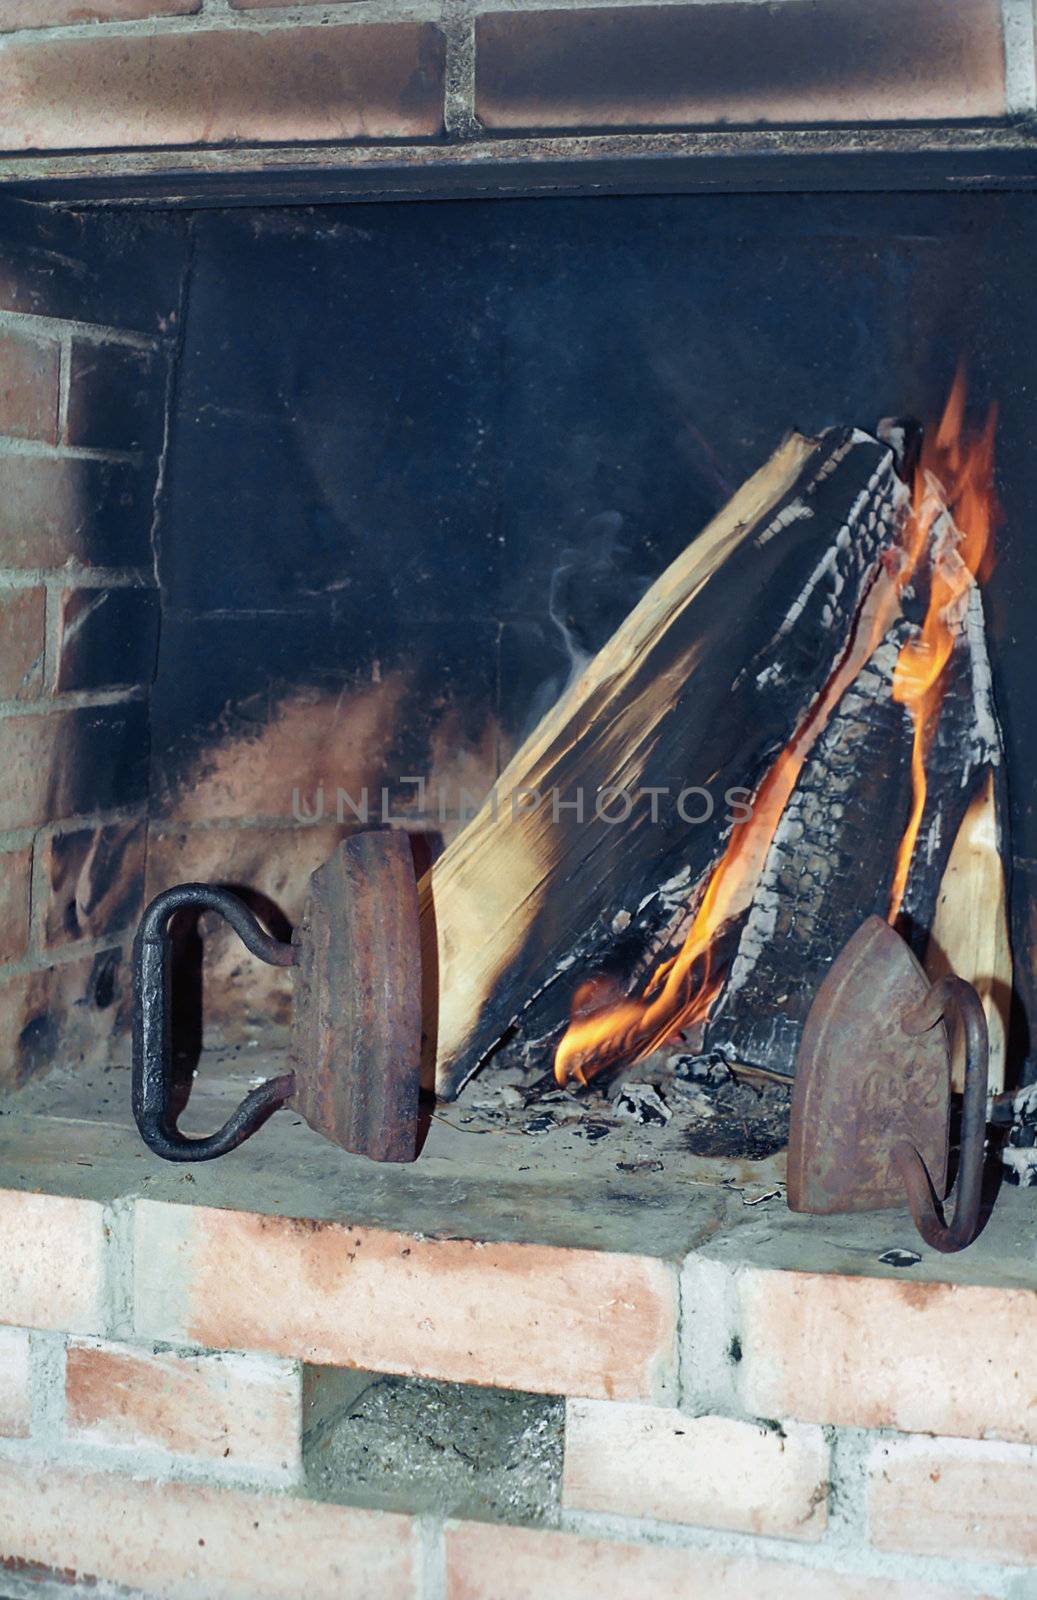 Two old irons in fireplace by mulden